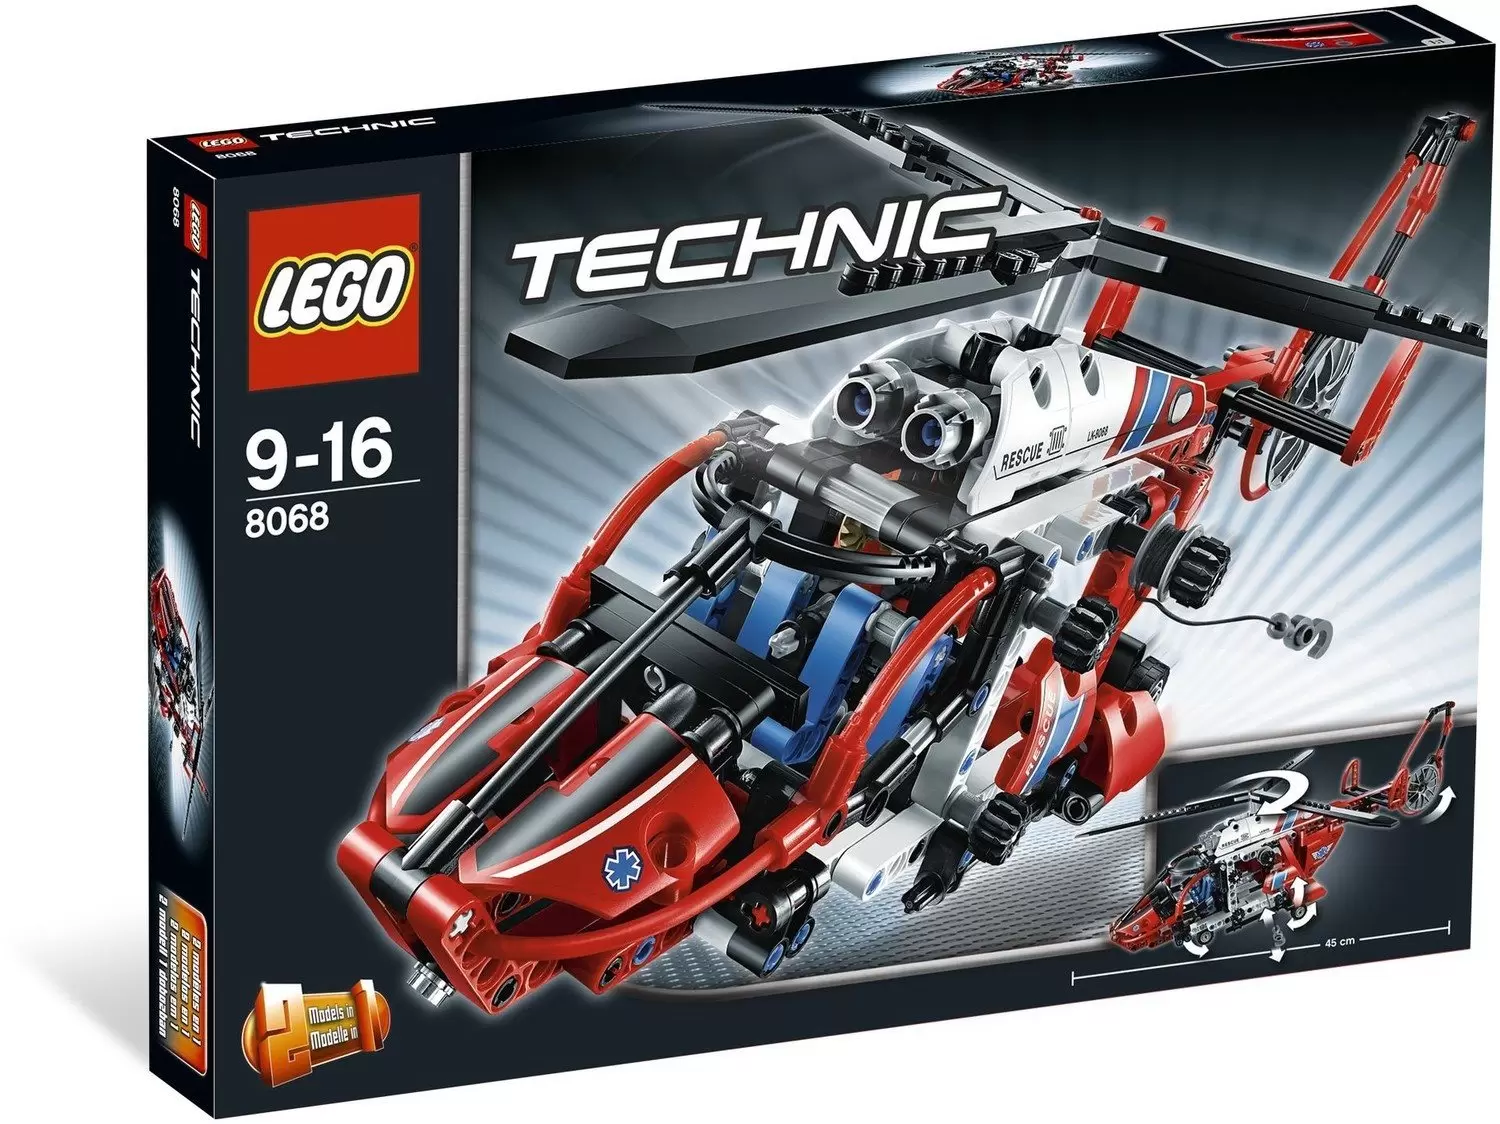 LEGO Technic - Rescue Helicopter